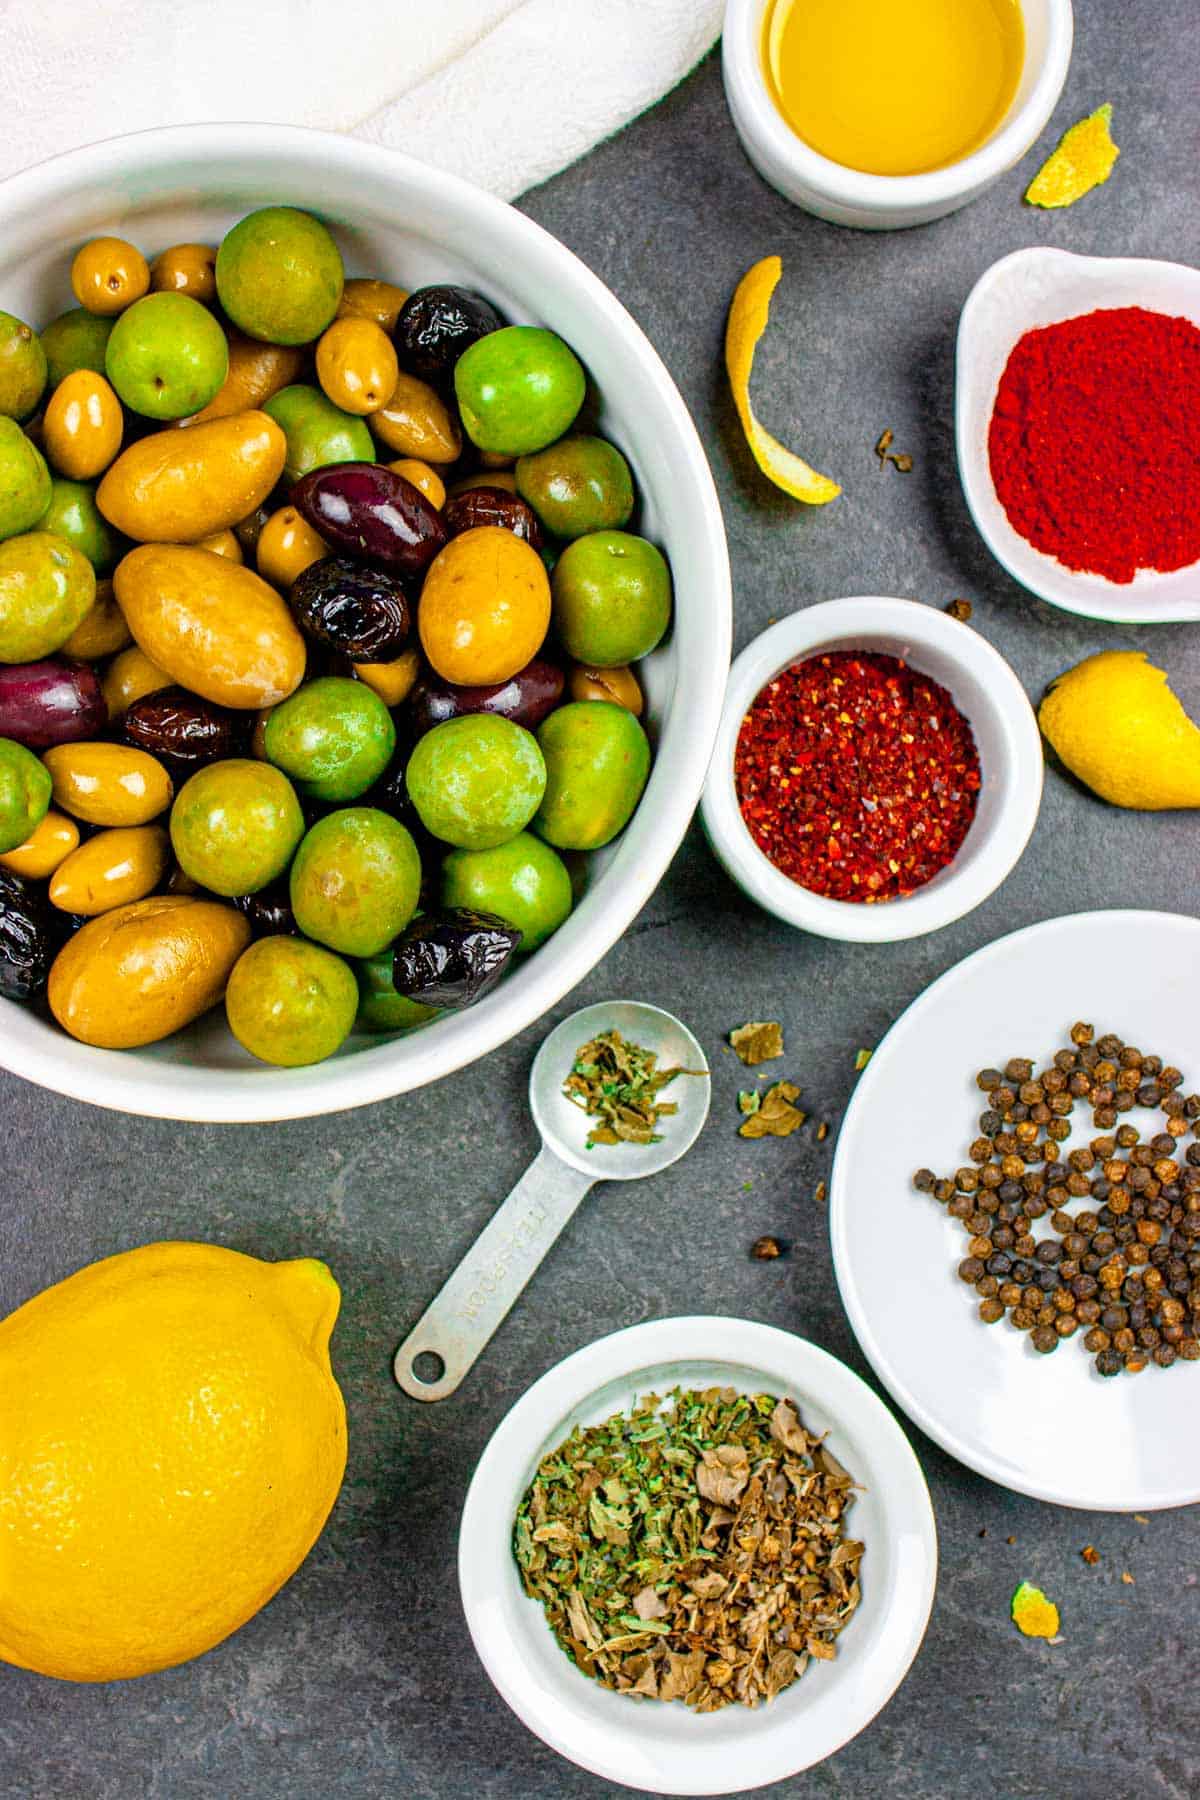 Ingredients for marinated olives including mixed olives in a bowl, spices in small ramekins, and a whole lemon on the side.